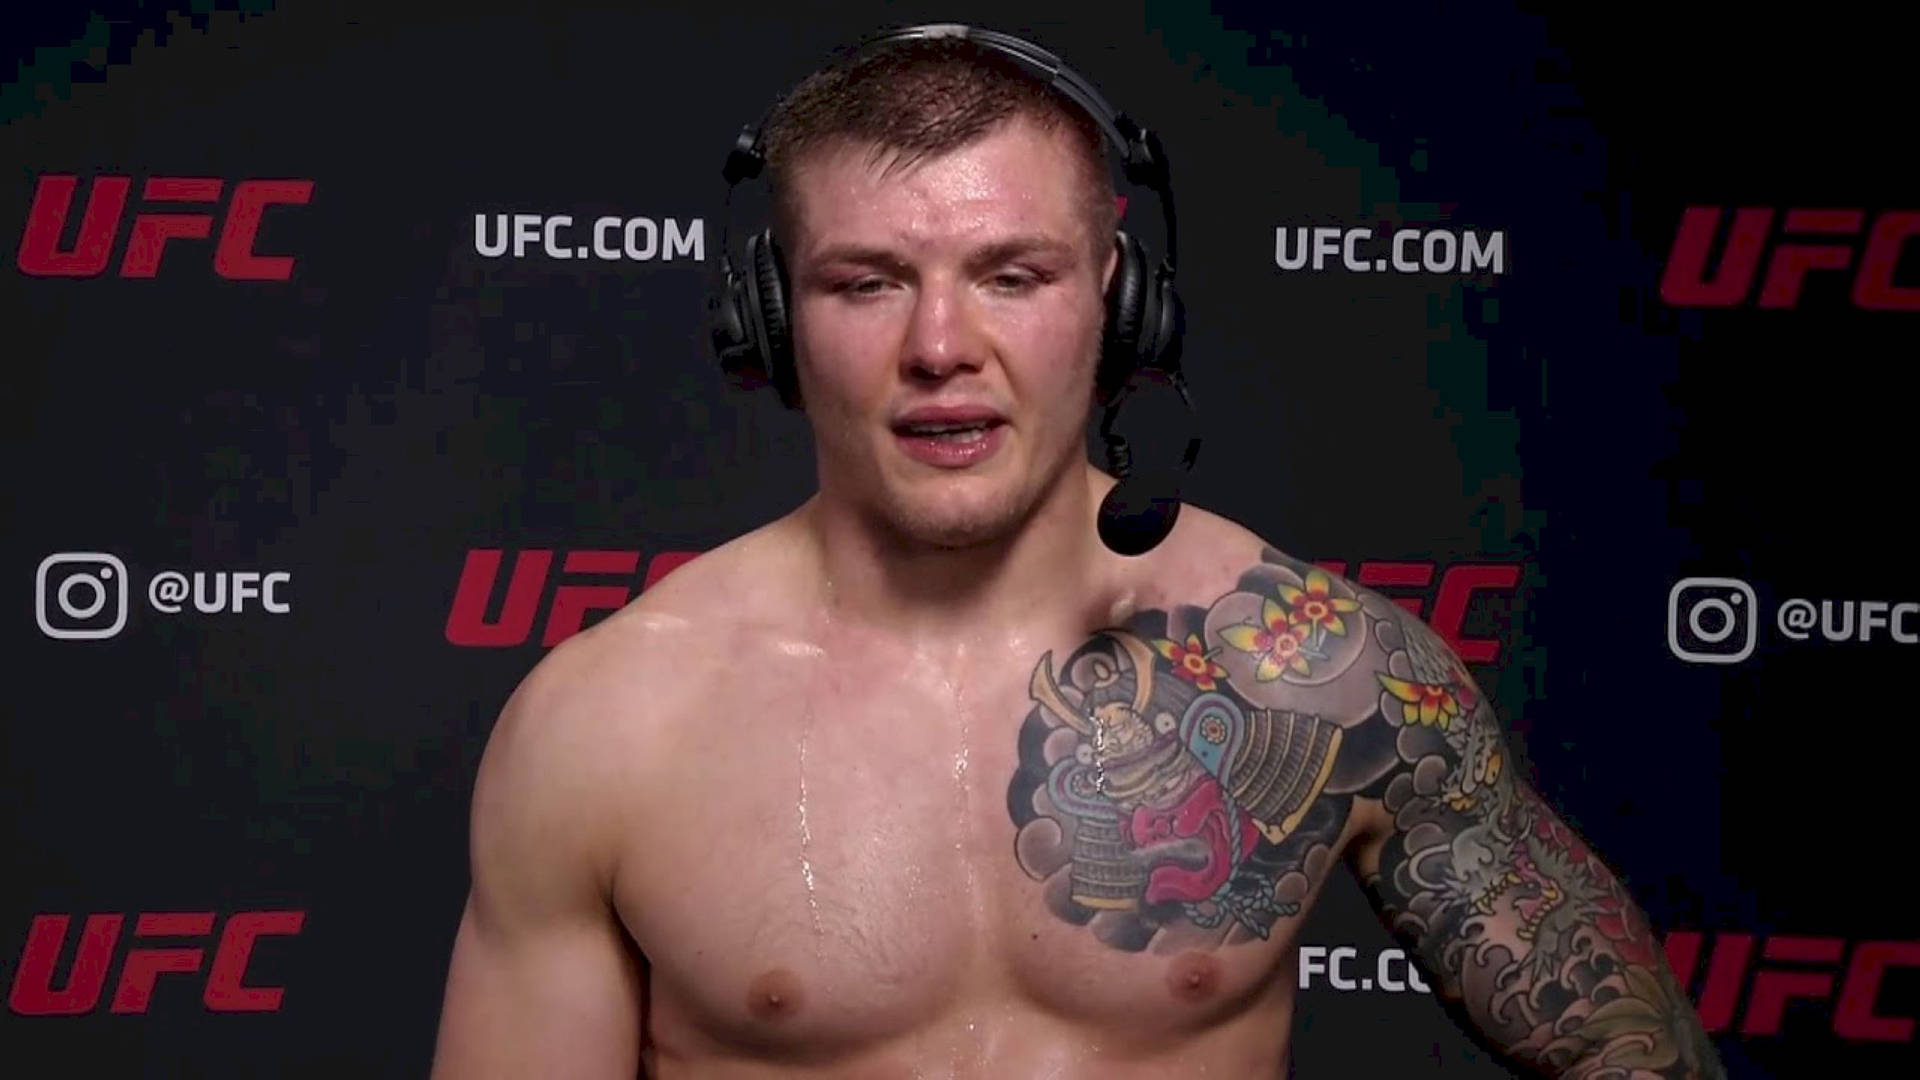 UFC Fighter Marvin Vettori Trains with High-Tech Headset Wallpaper